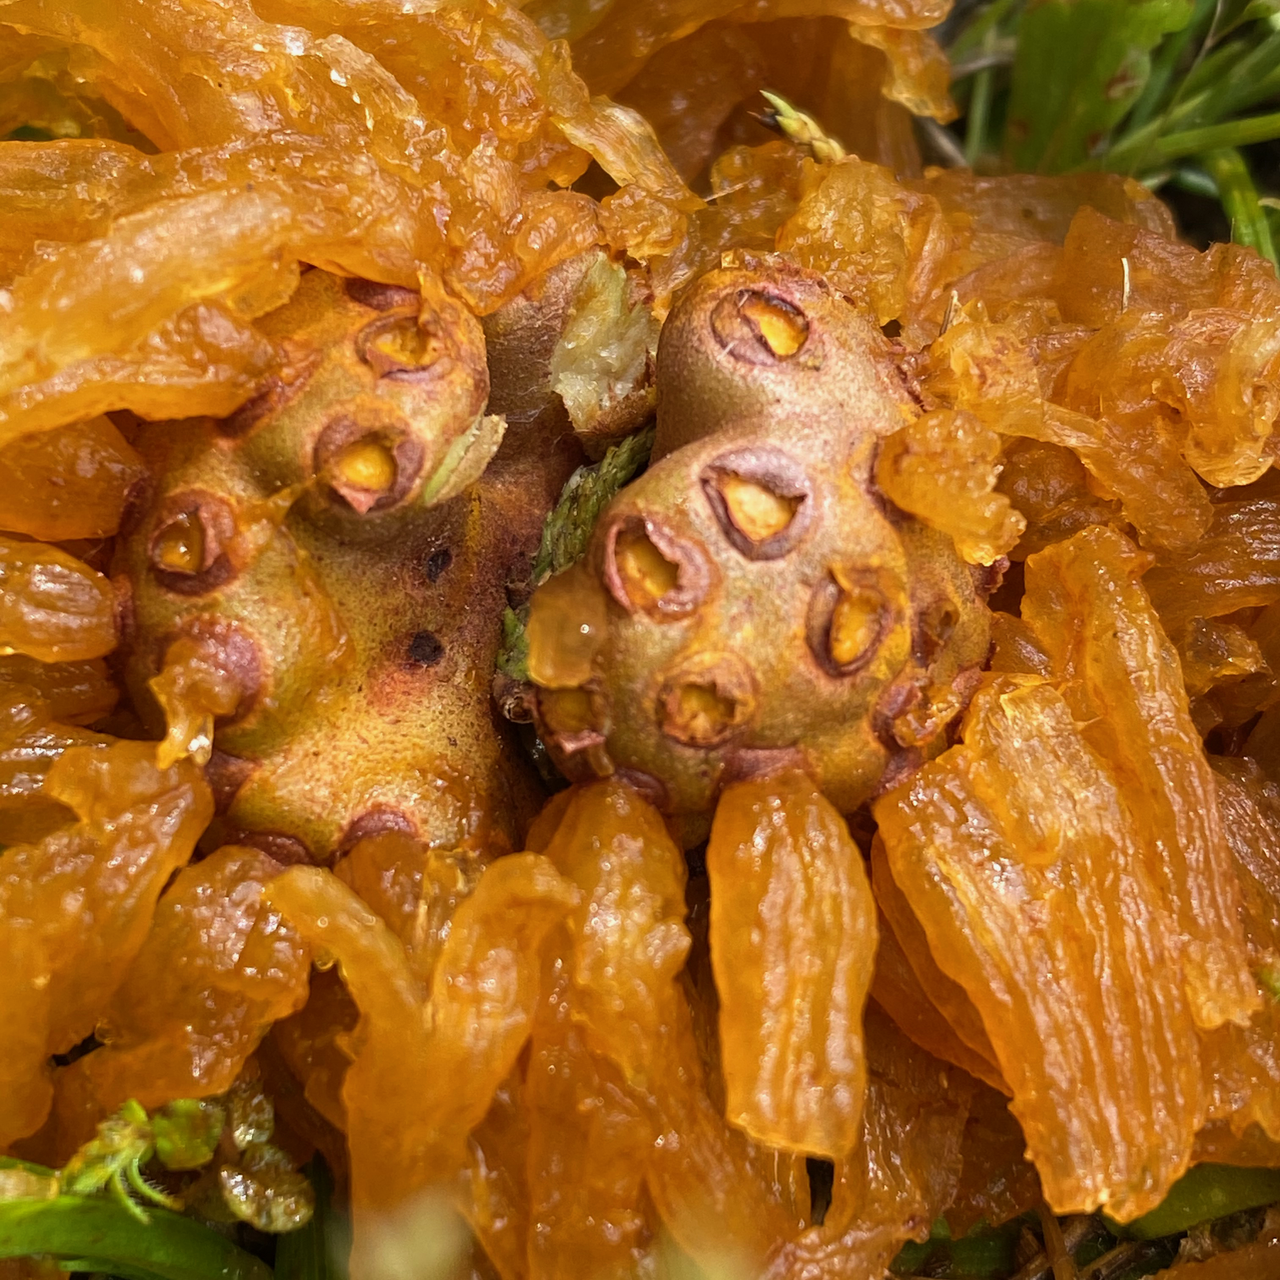 Gall with Gelatinous Tendrils